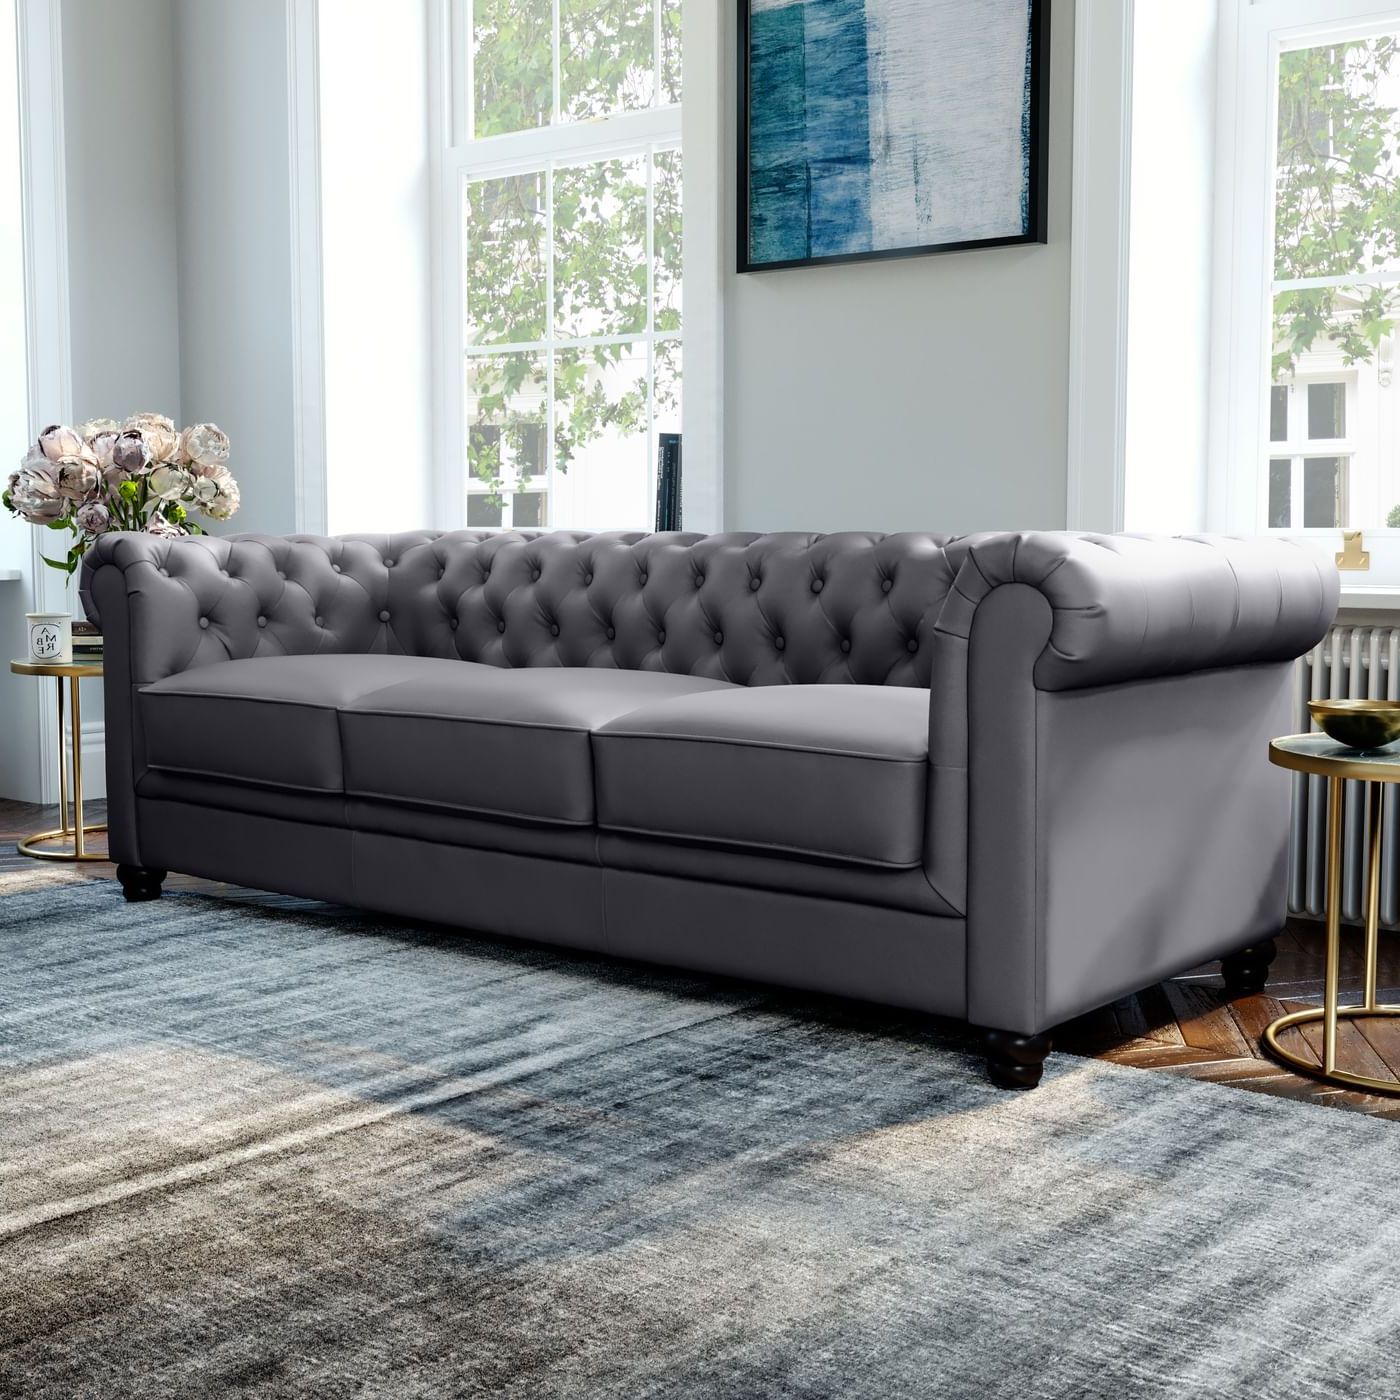 Hampton Grey Leather 3 Seater Chesterfield Sofa (View 9 of 15)